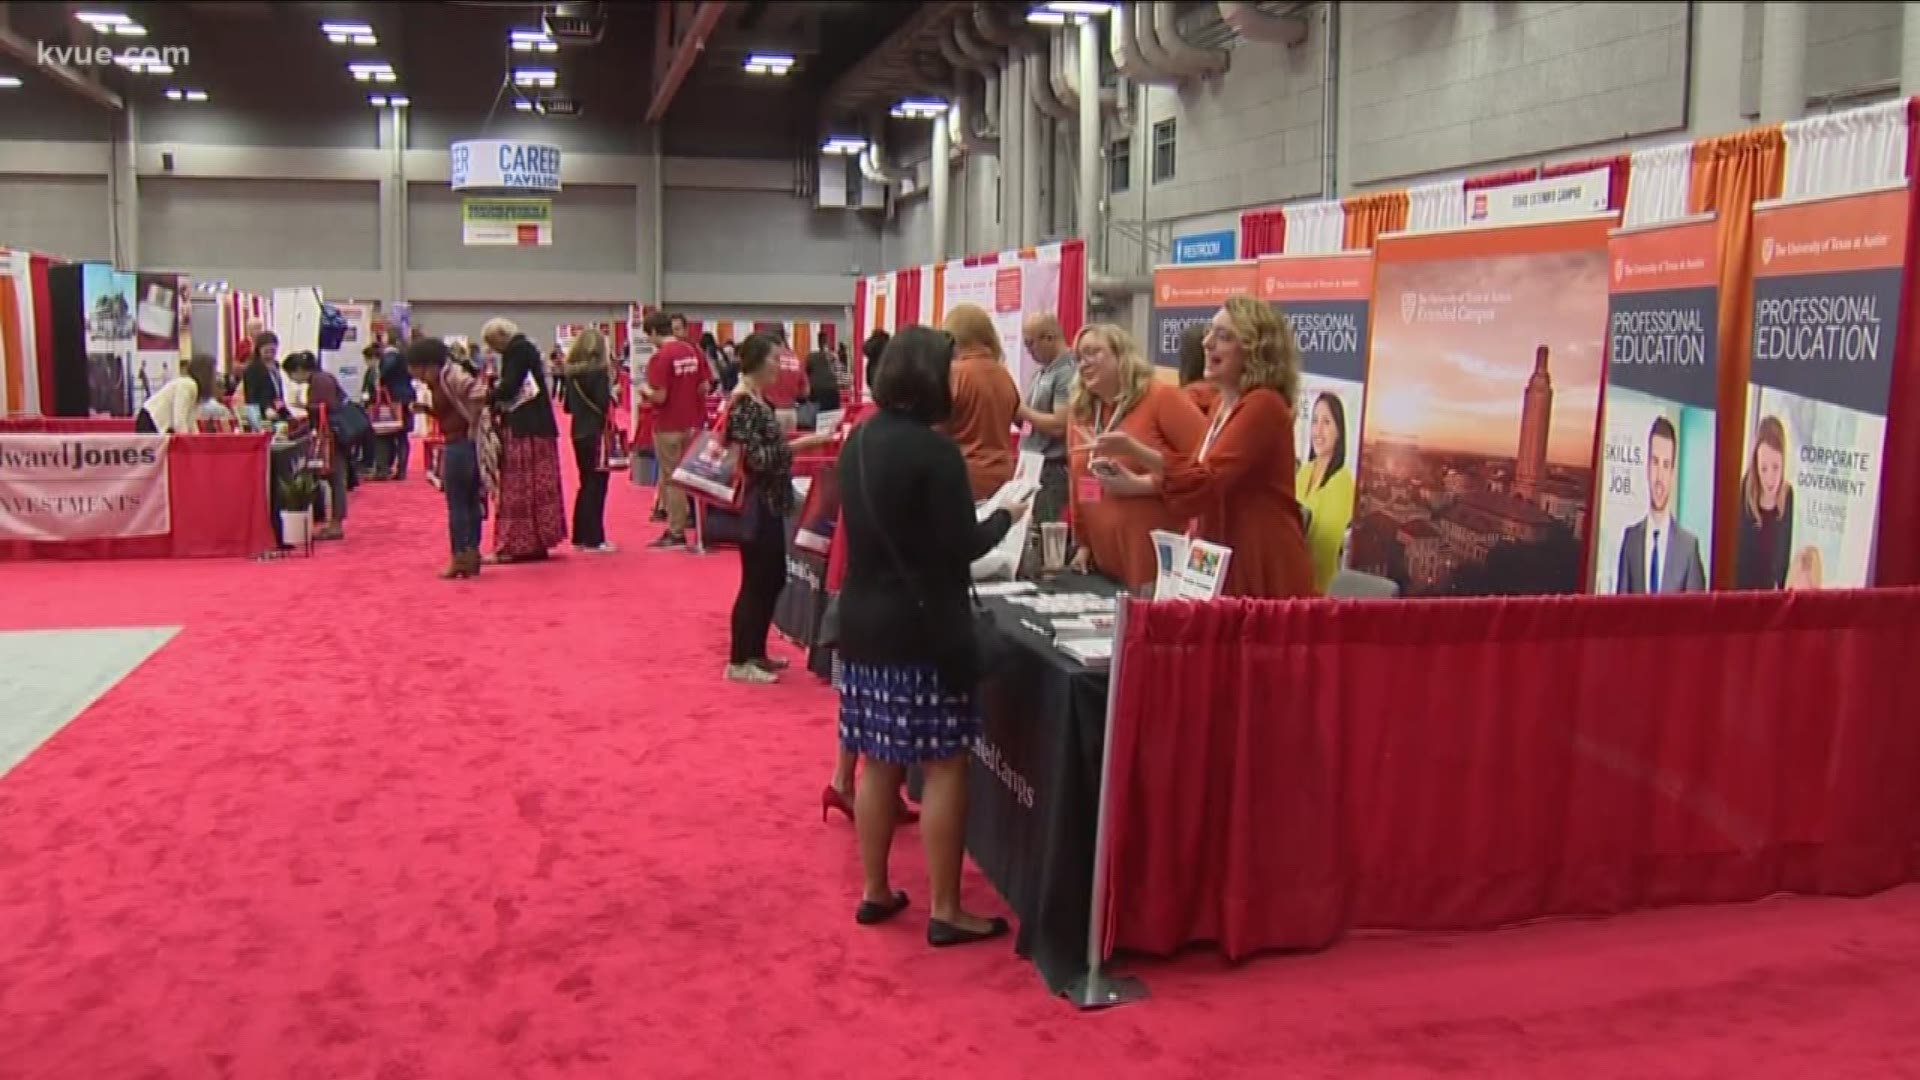 Over the past 20 years, the Texas Conference for Women has had more than 100,000 women and men participate in the event.